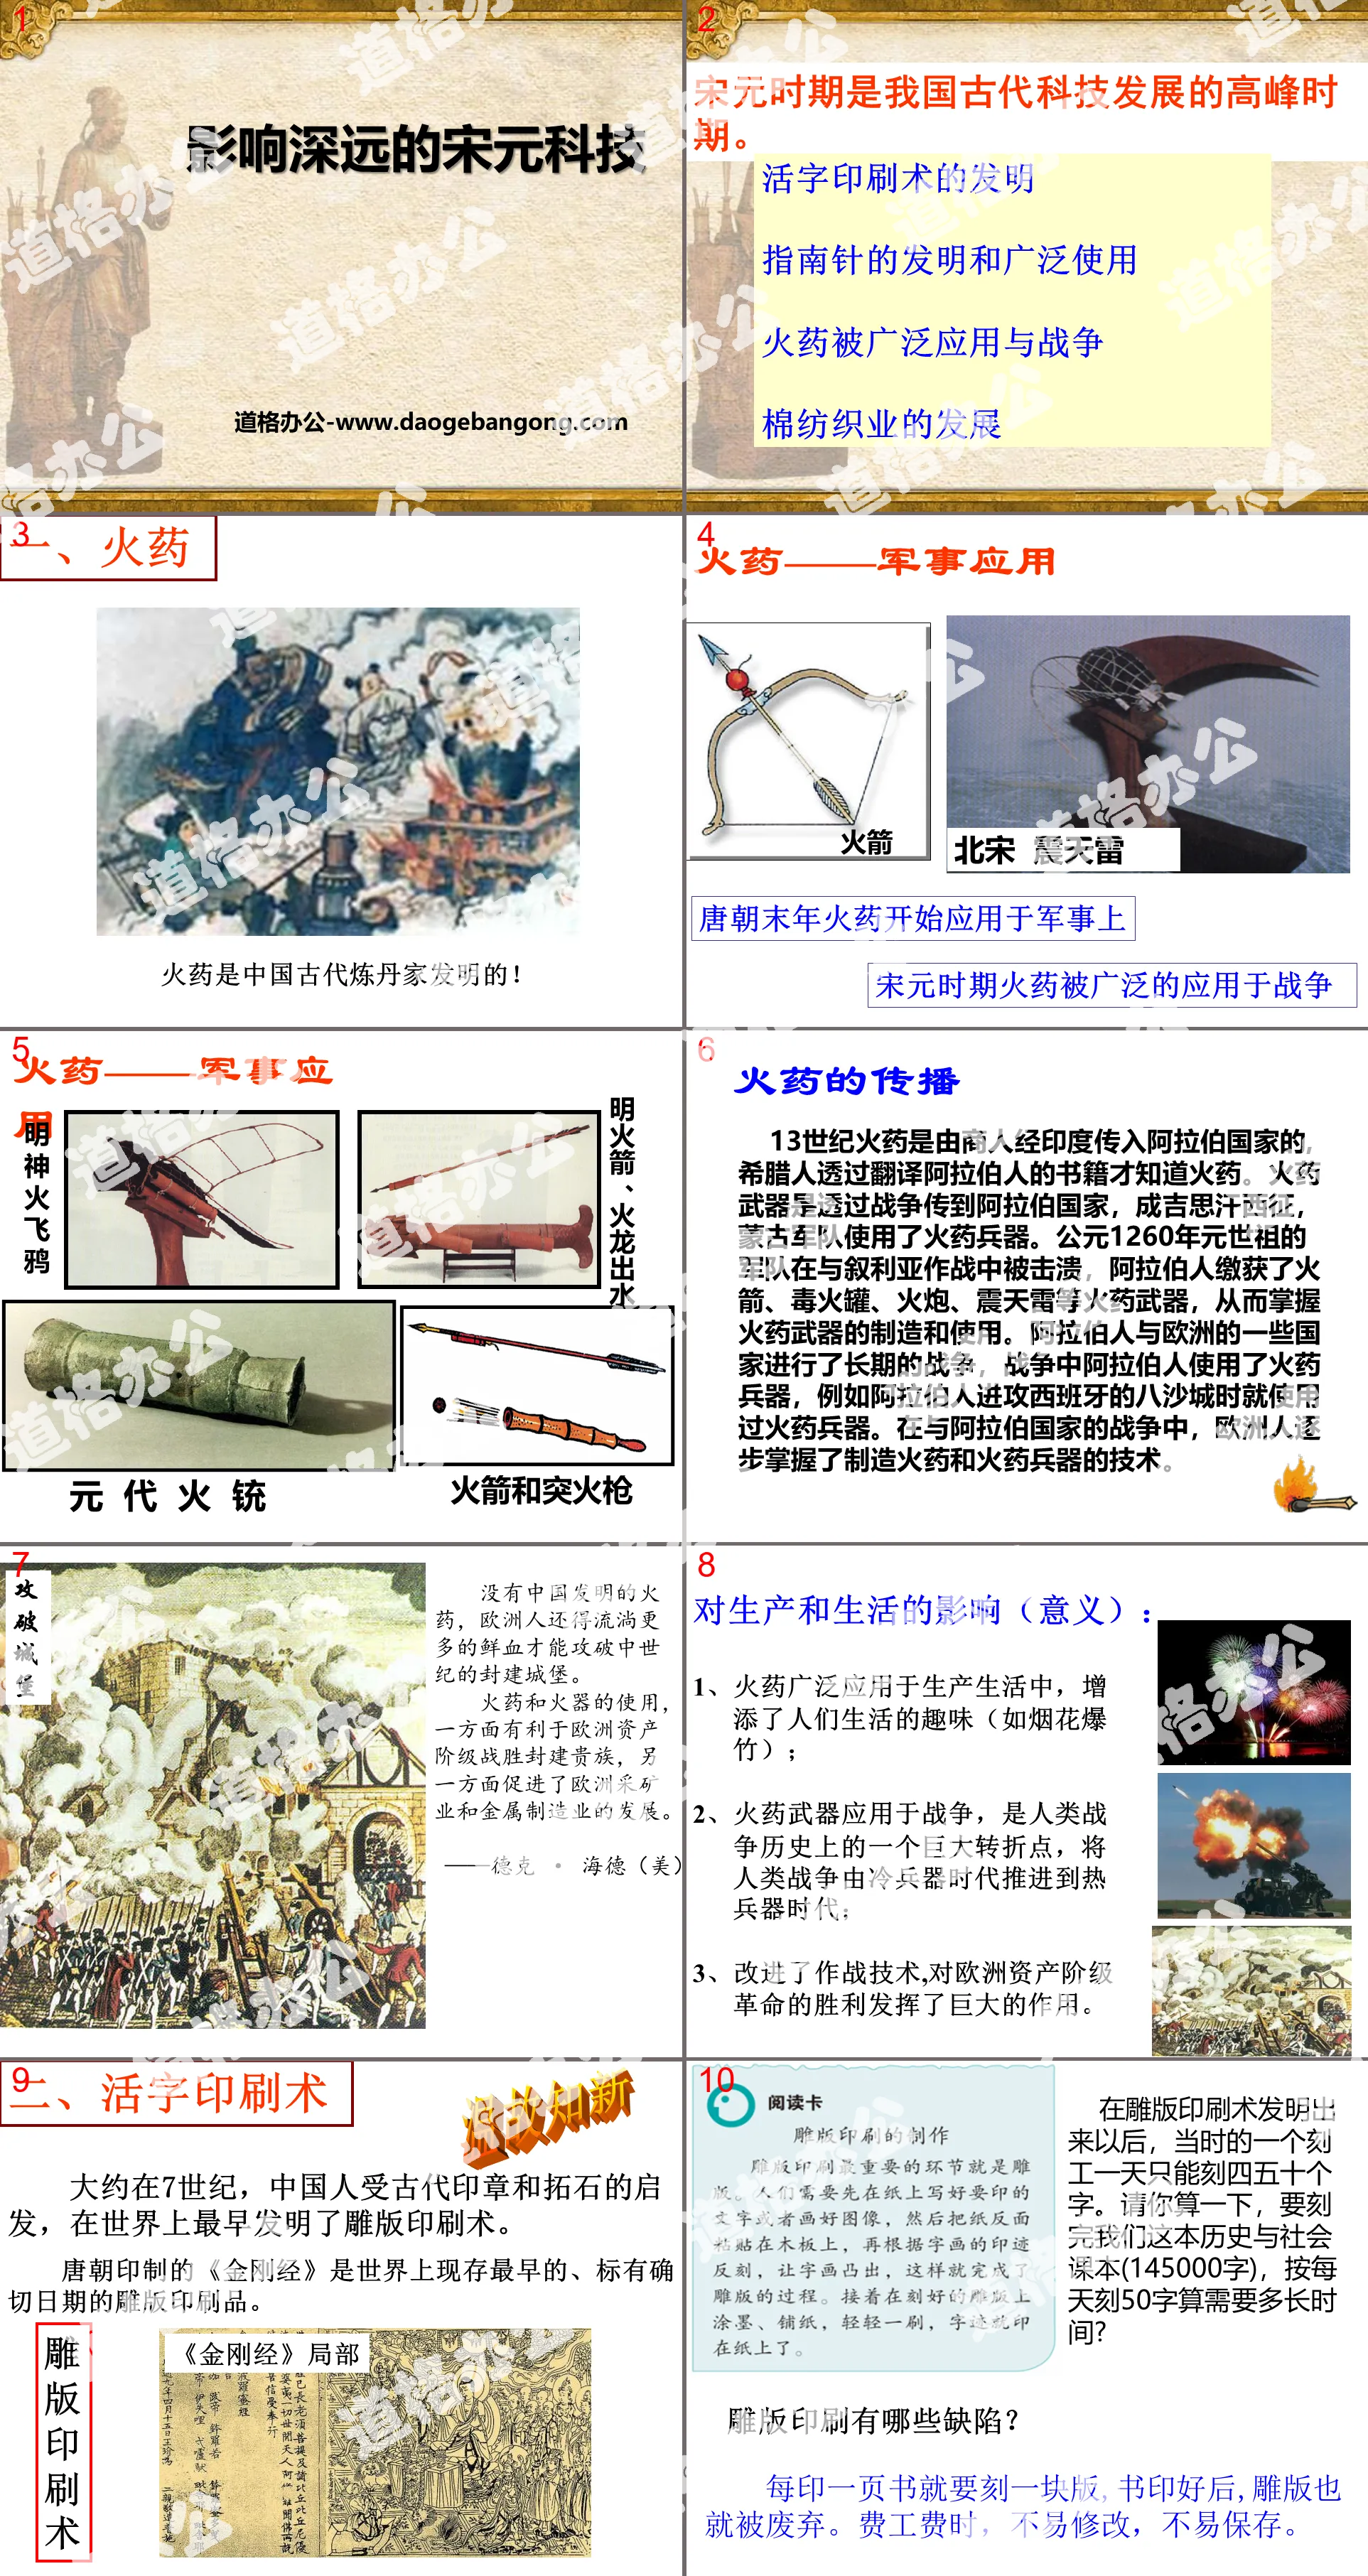 "Far-reaching Science and Technology of the Song and Yuan Dynasties" "Pluralism and Integration" Pattern and High-level Development of Civilization PPT